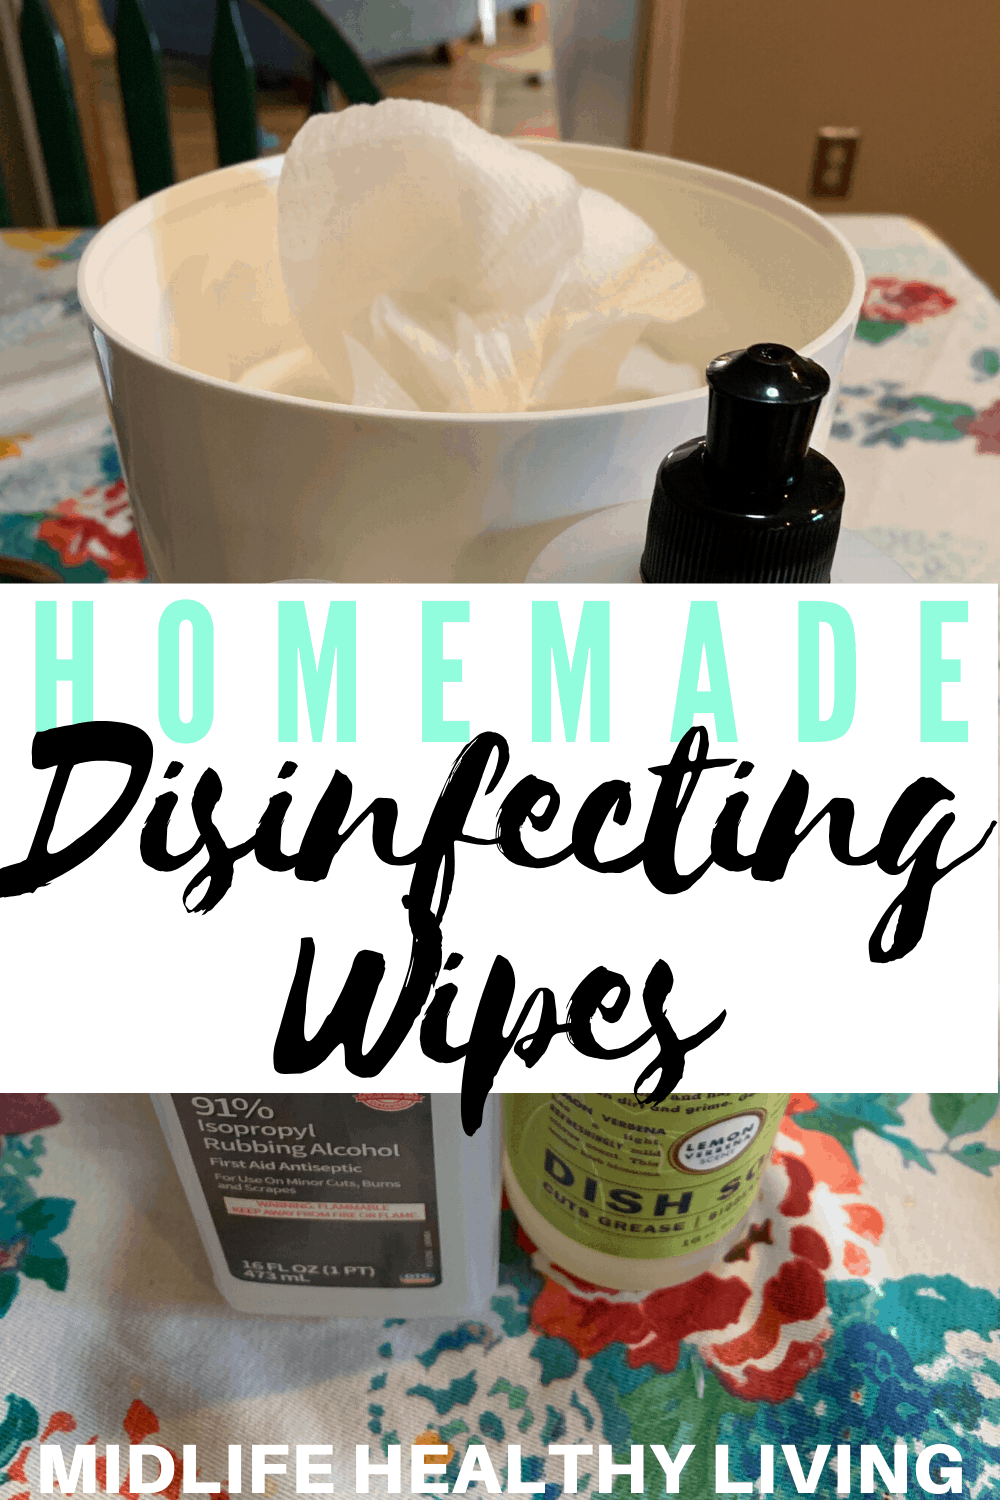 A pin showing the wipes made with alcohol for DIY disinfecting wipes recipe.